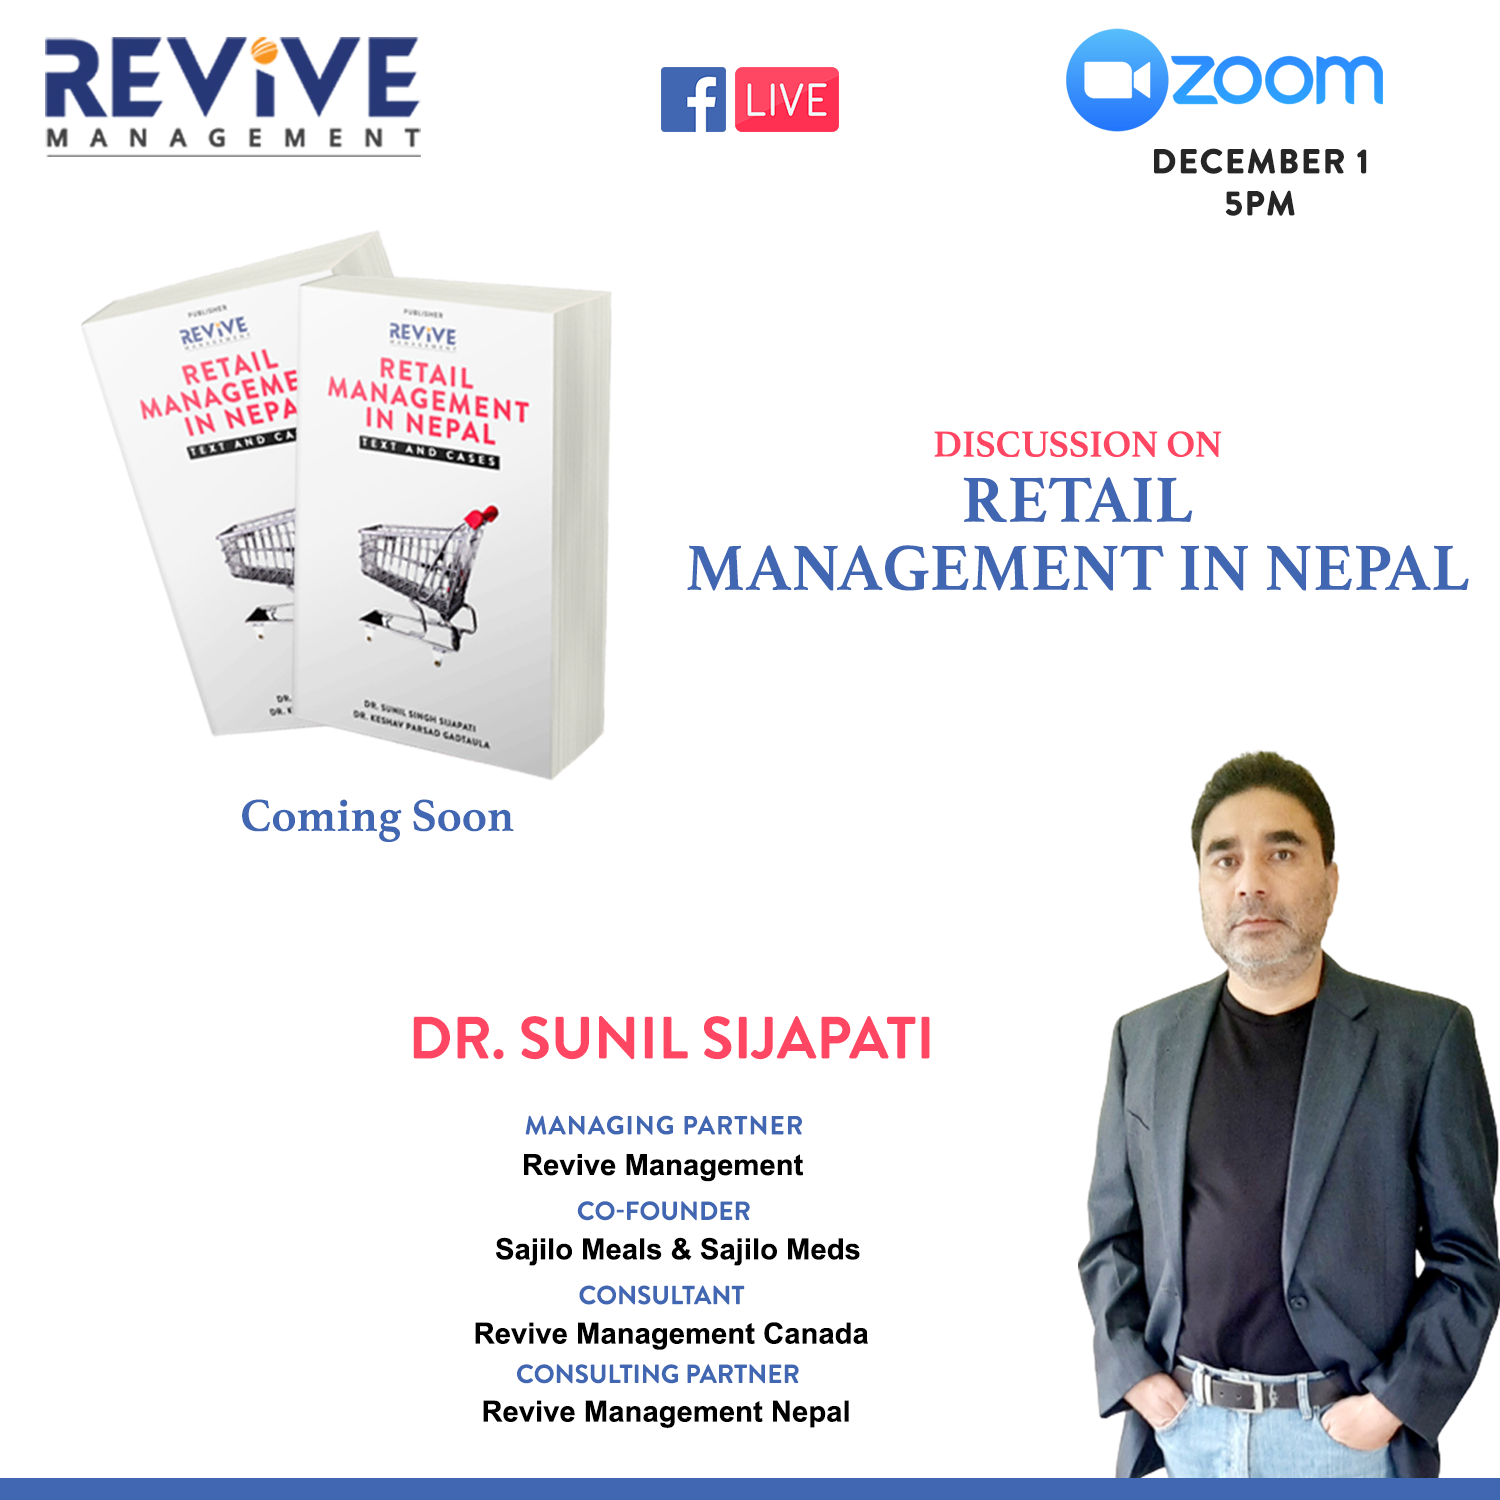 Discussion on Retail Management in Nepal